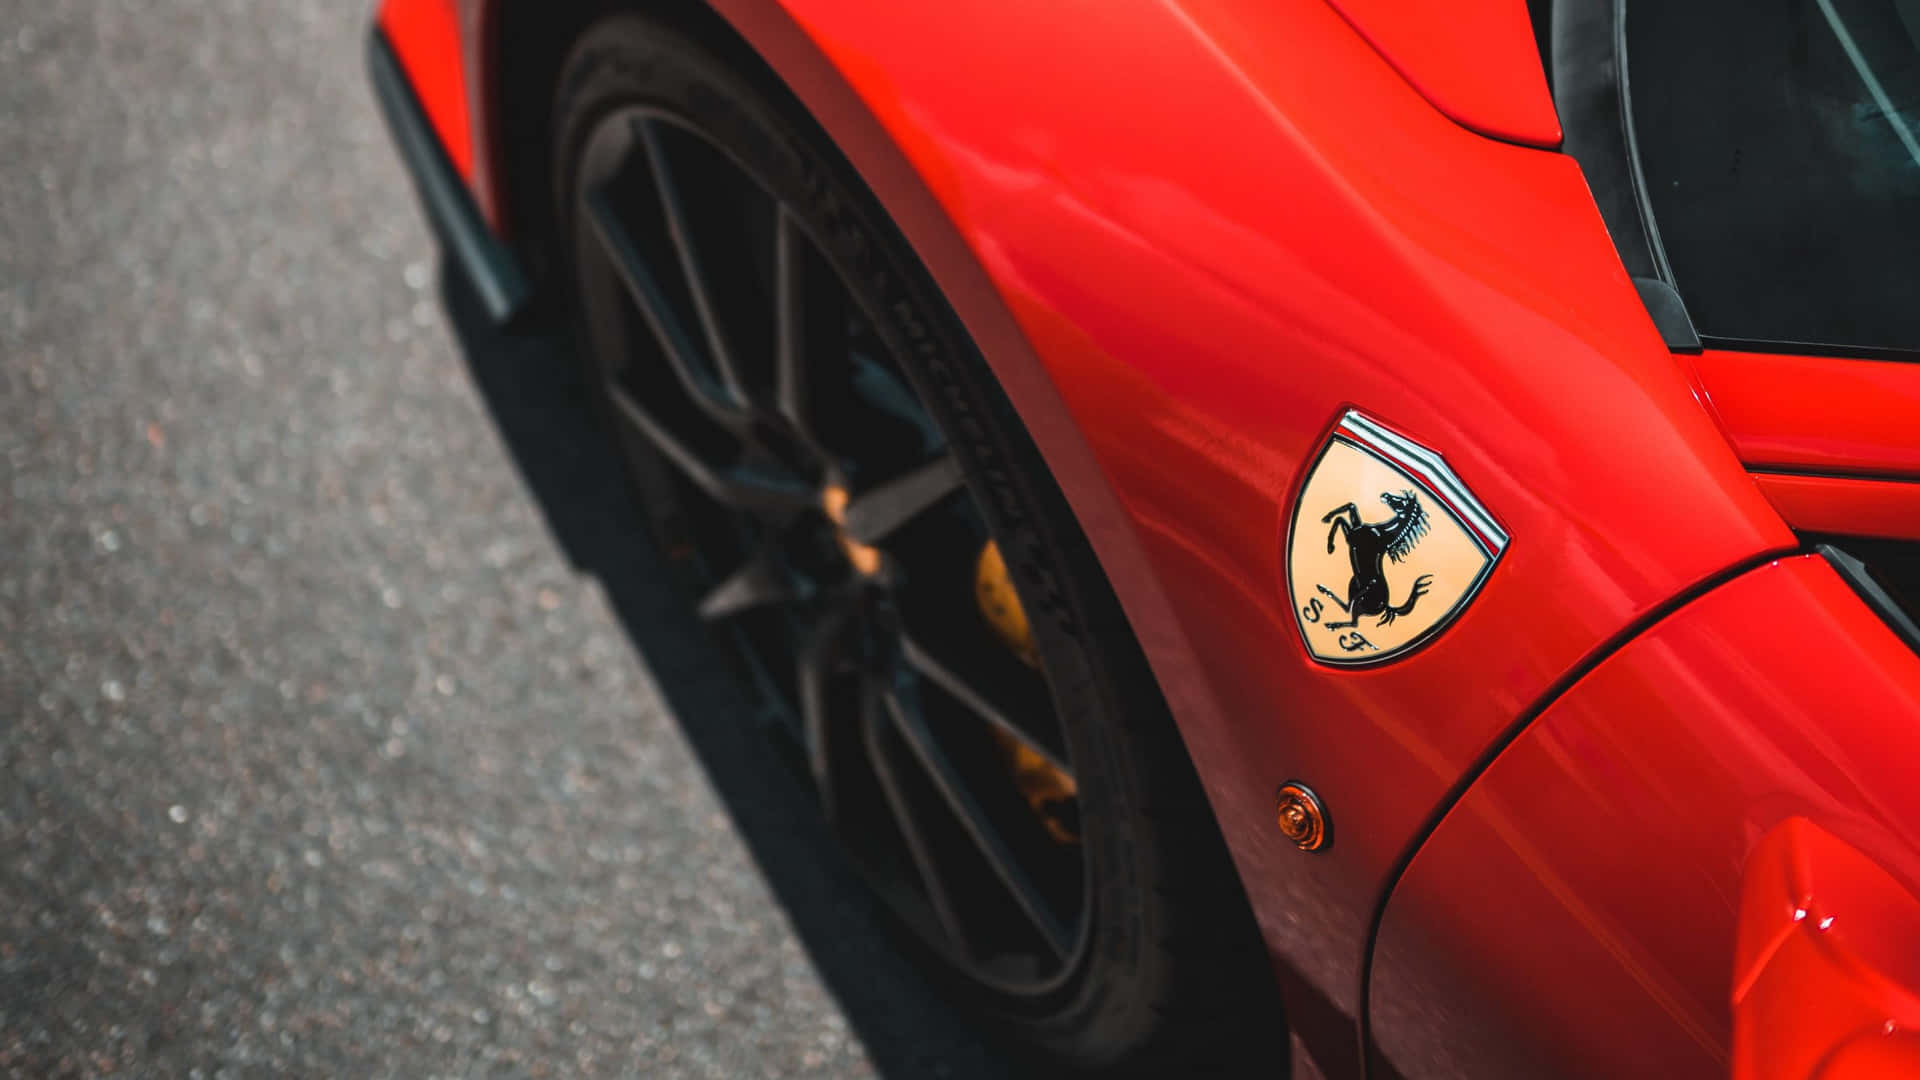 Cruise the Streets in Style with a Cool Ferrari Wallpaper